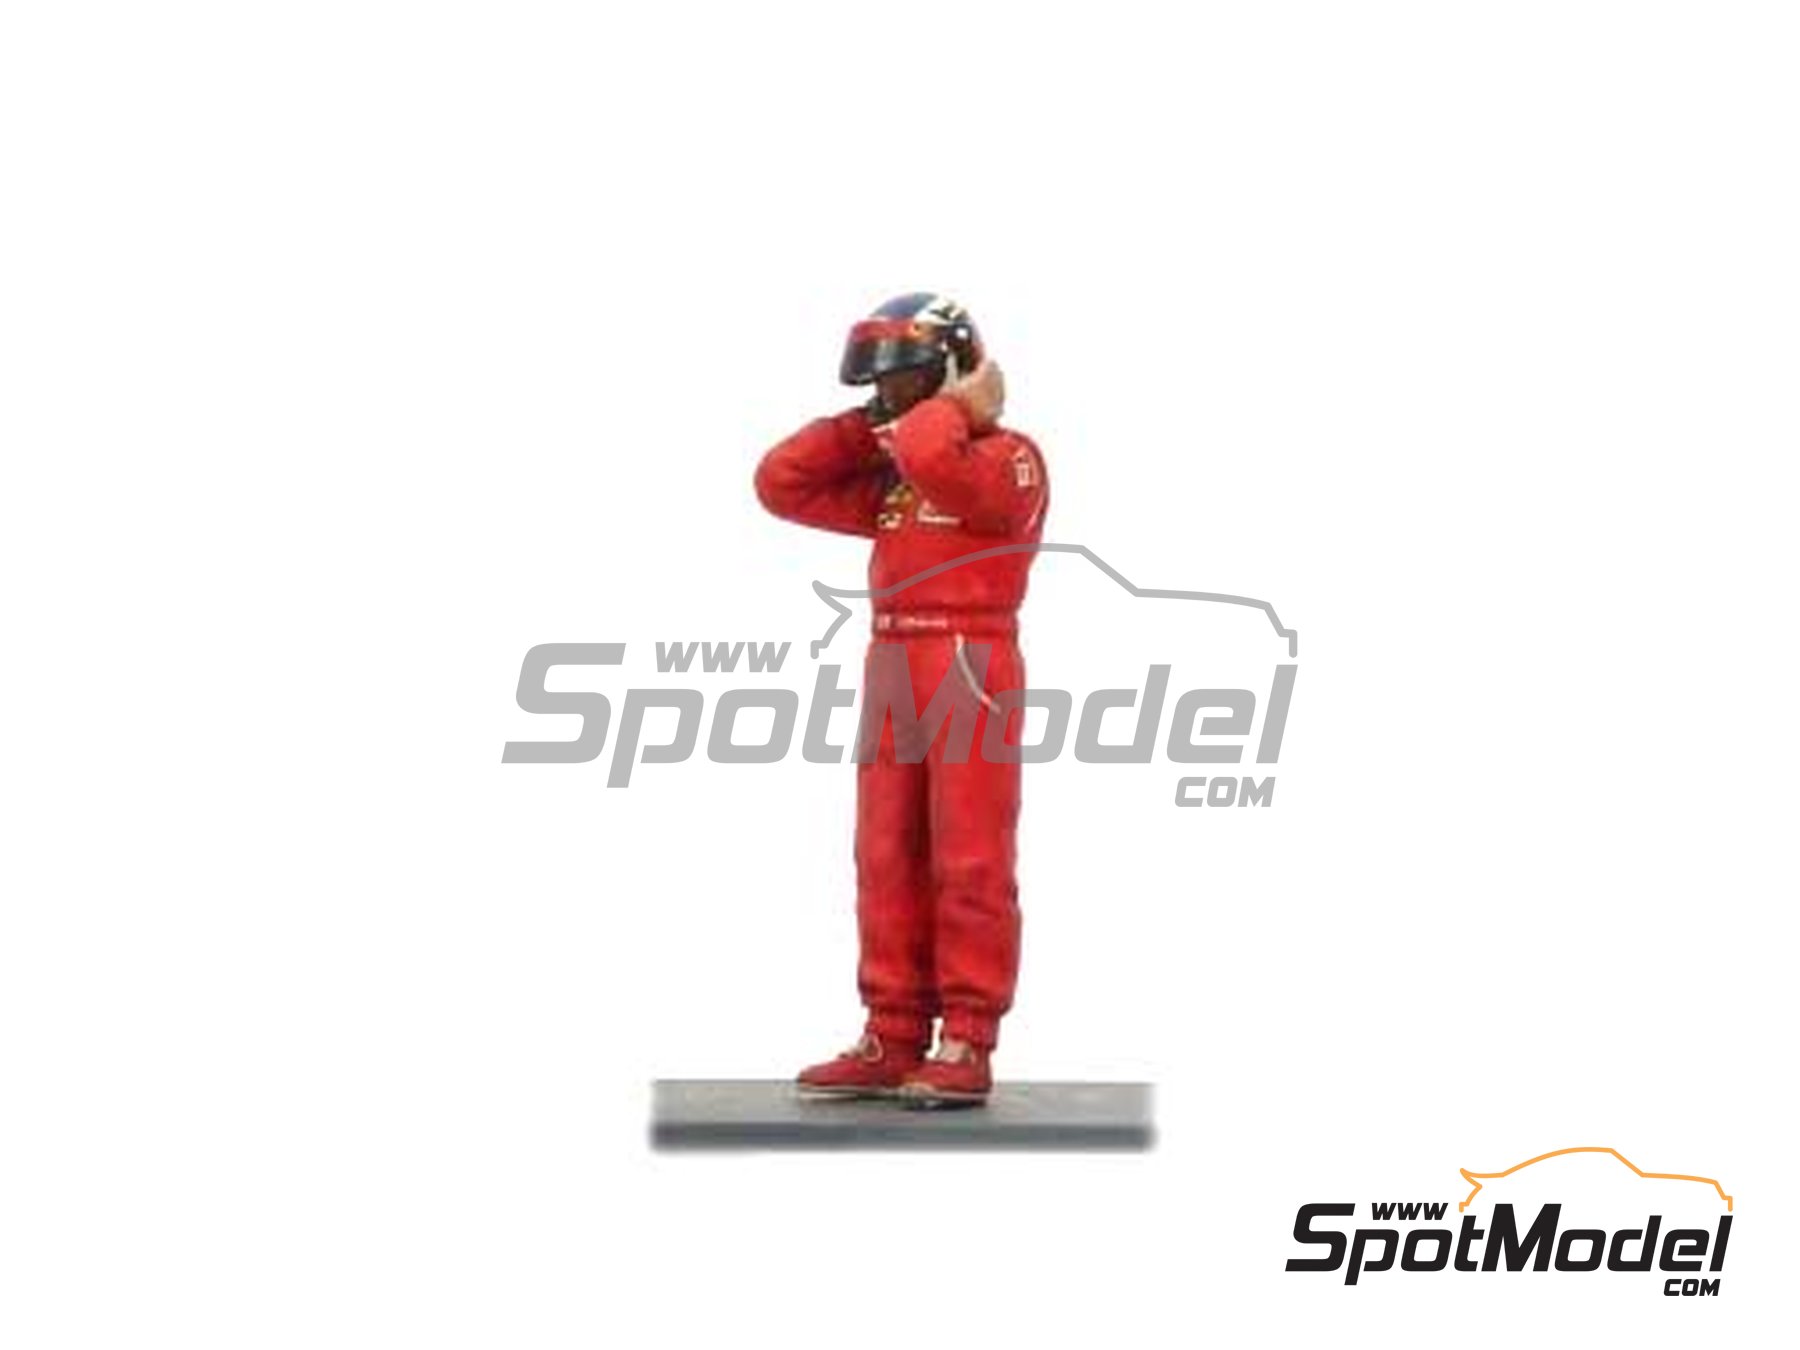 1/43  DRIVER  FIGURES  O SCALE  SIXTIES  RACE  CARS  SET 38 B  MADE  BY  VROOM 